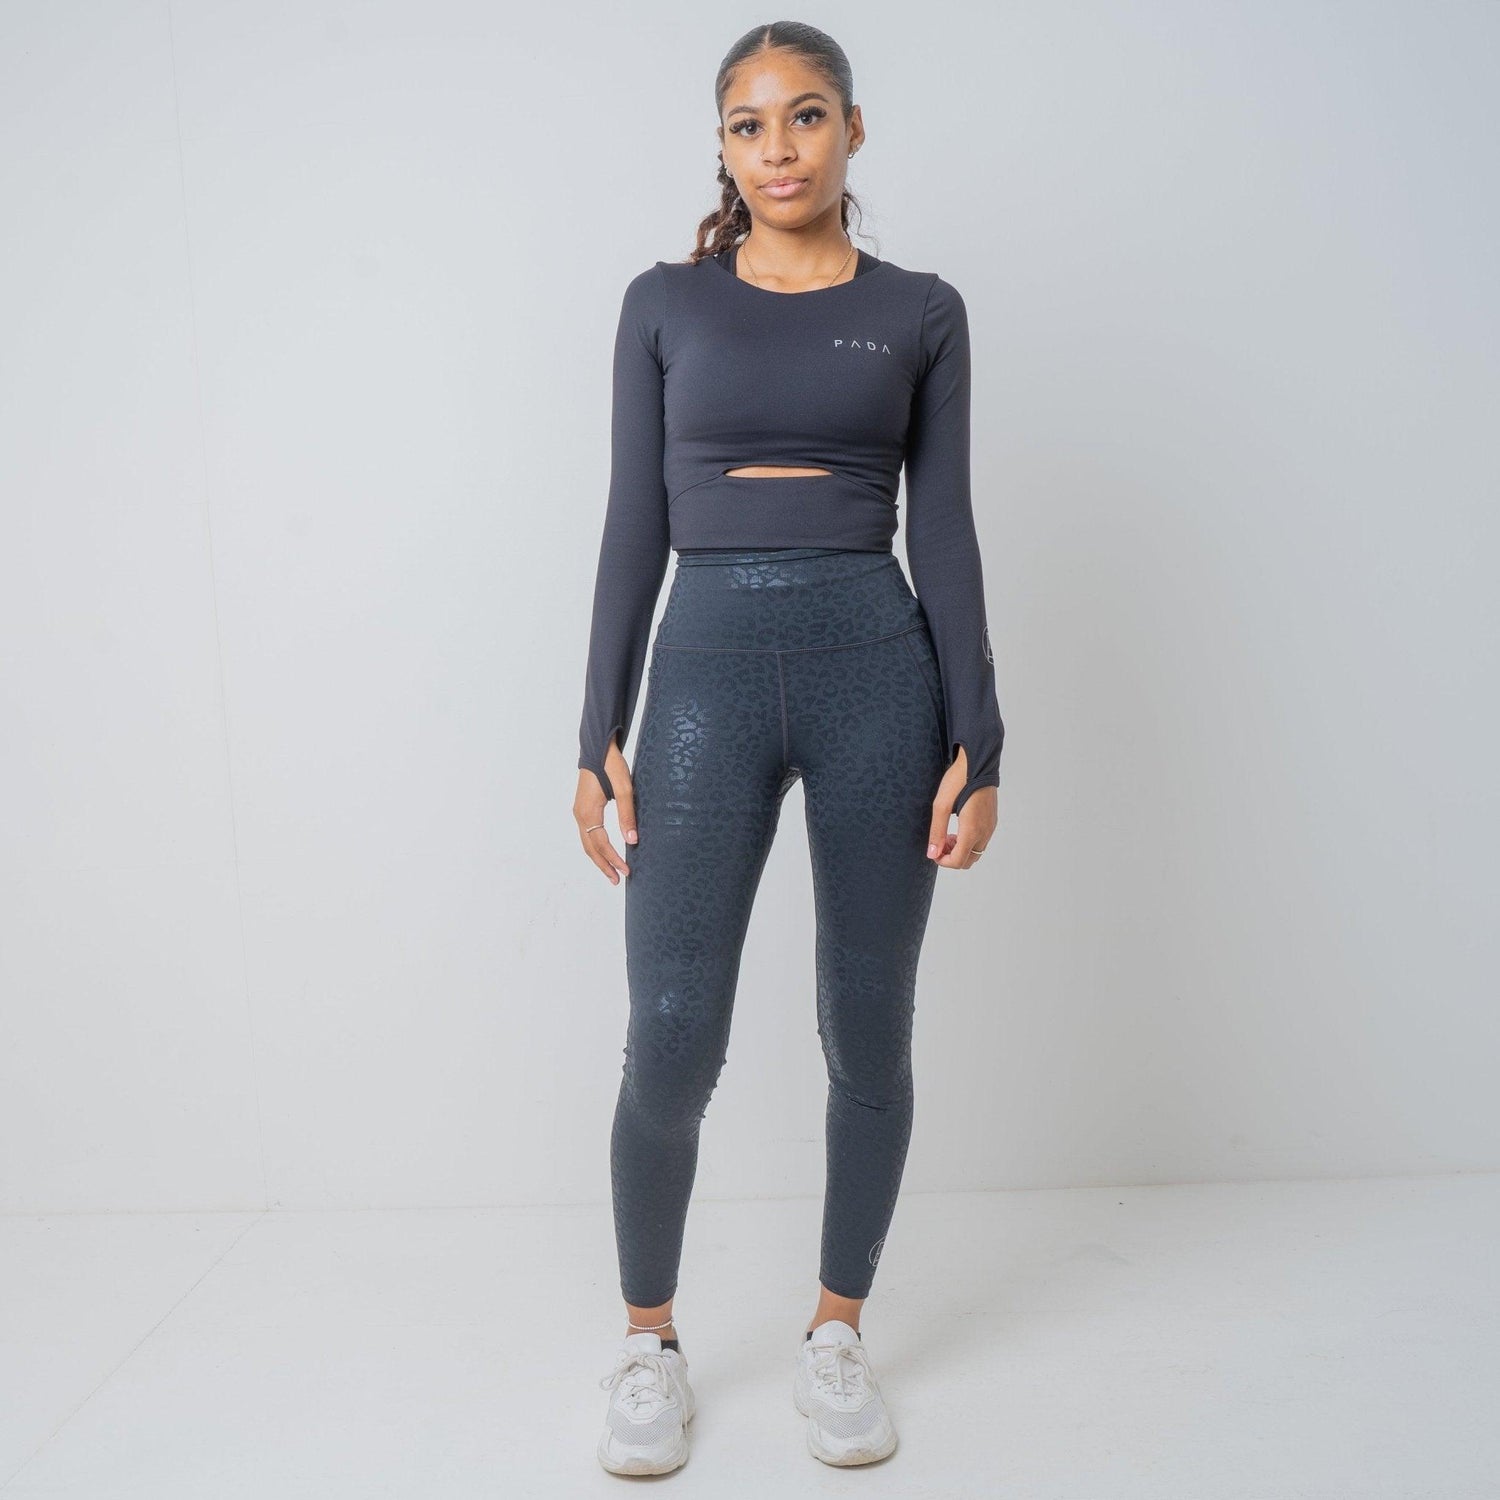 classic collection woman in black gym clothing